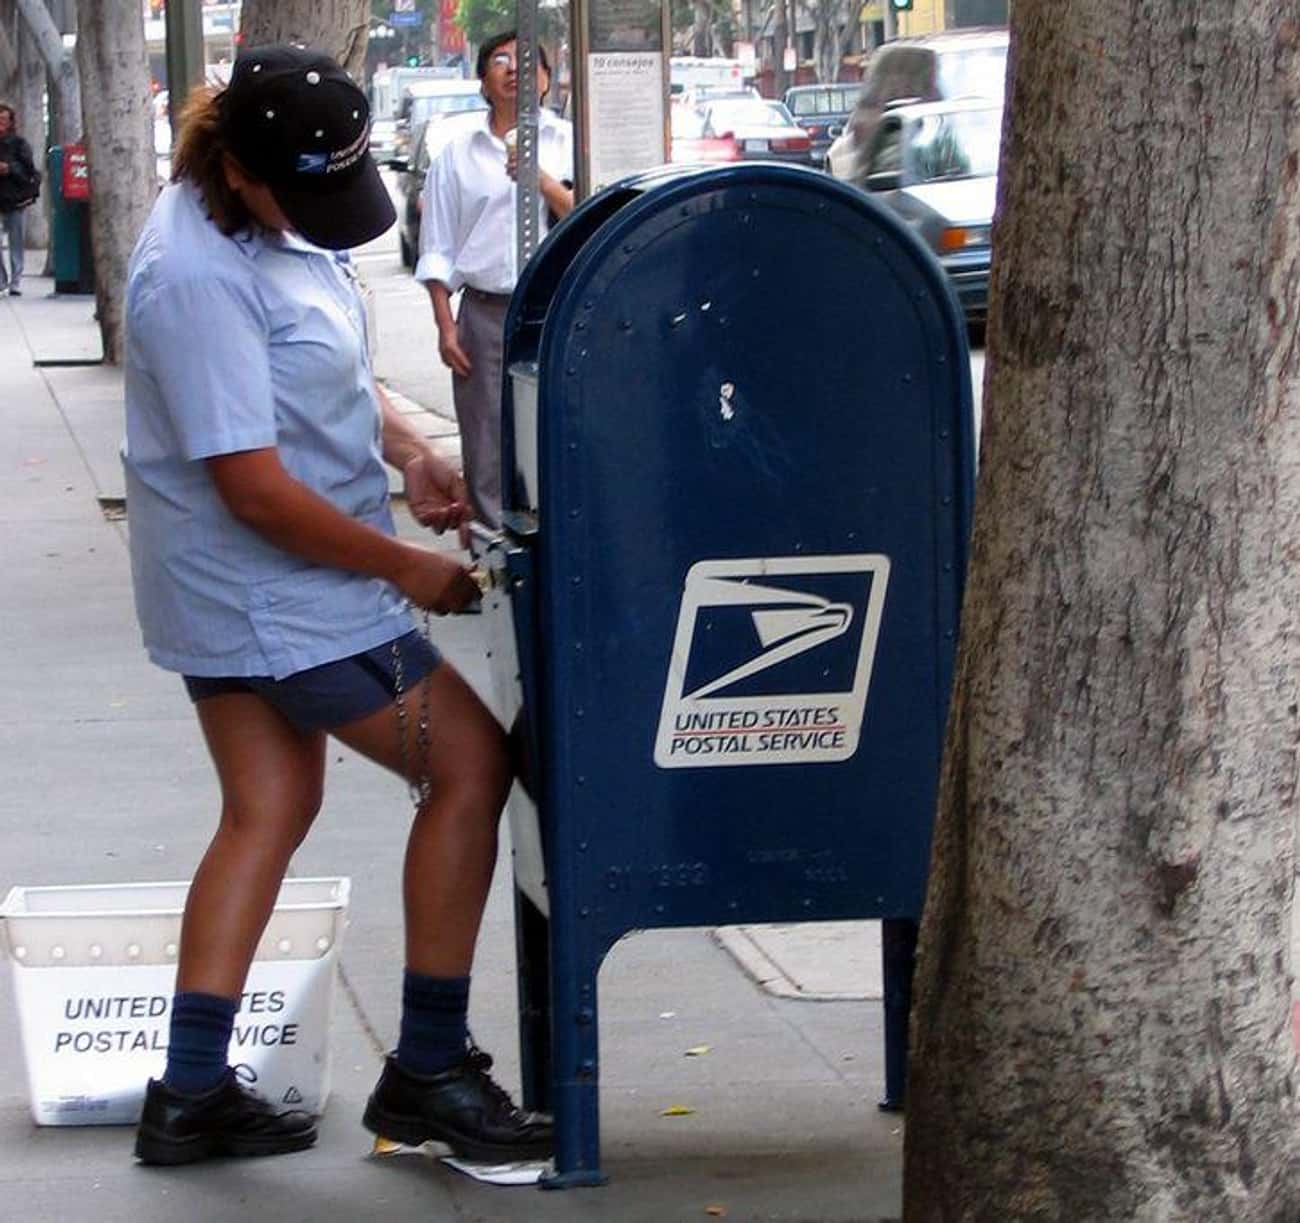 The First Female Mail Carrier Was Hired in 1845